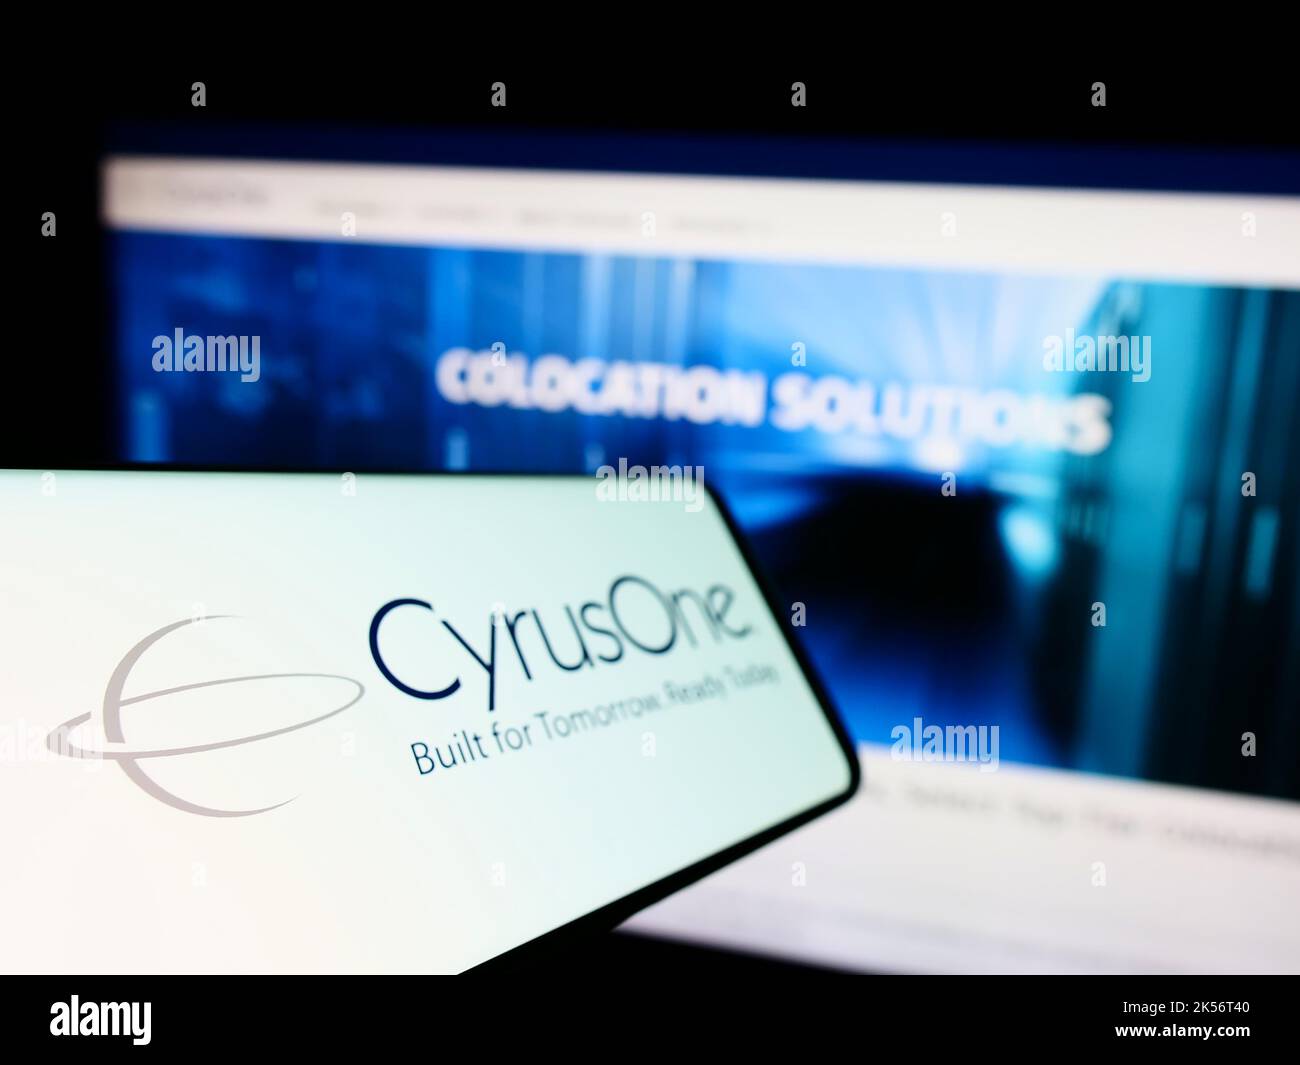 Smartphone with logo of American data center company CyrusOne LLC on screen in front of business website. Focus on left of phone display. Stock Photo